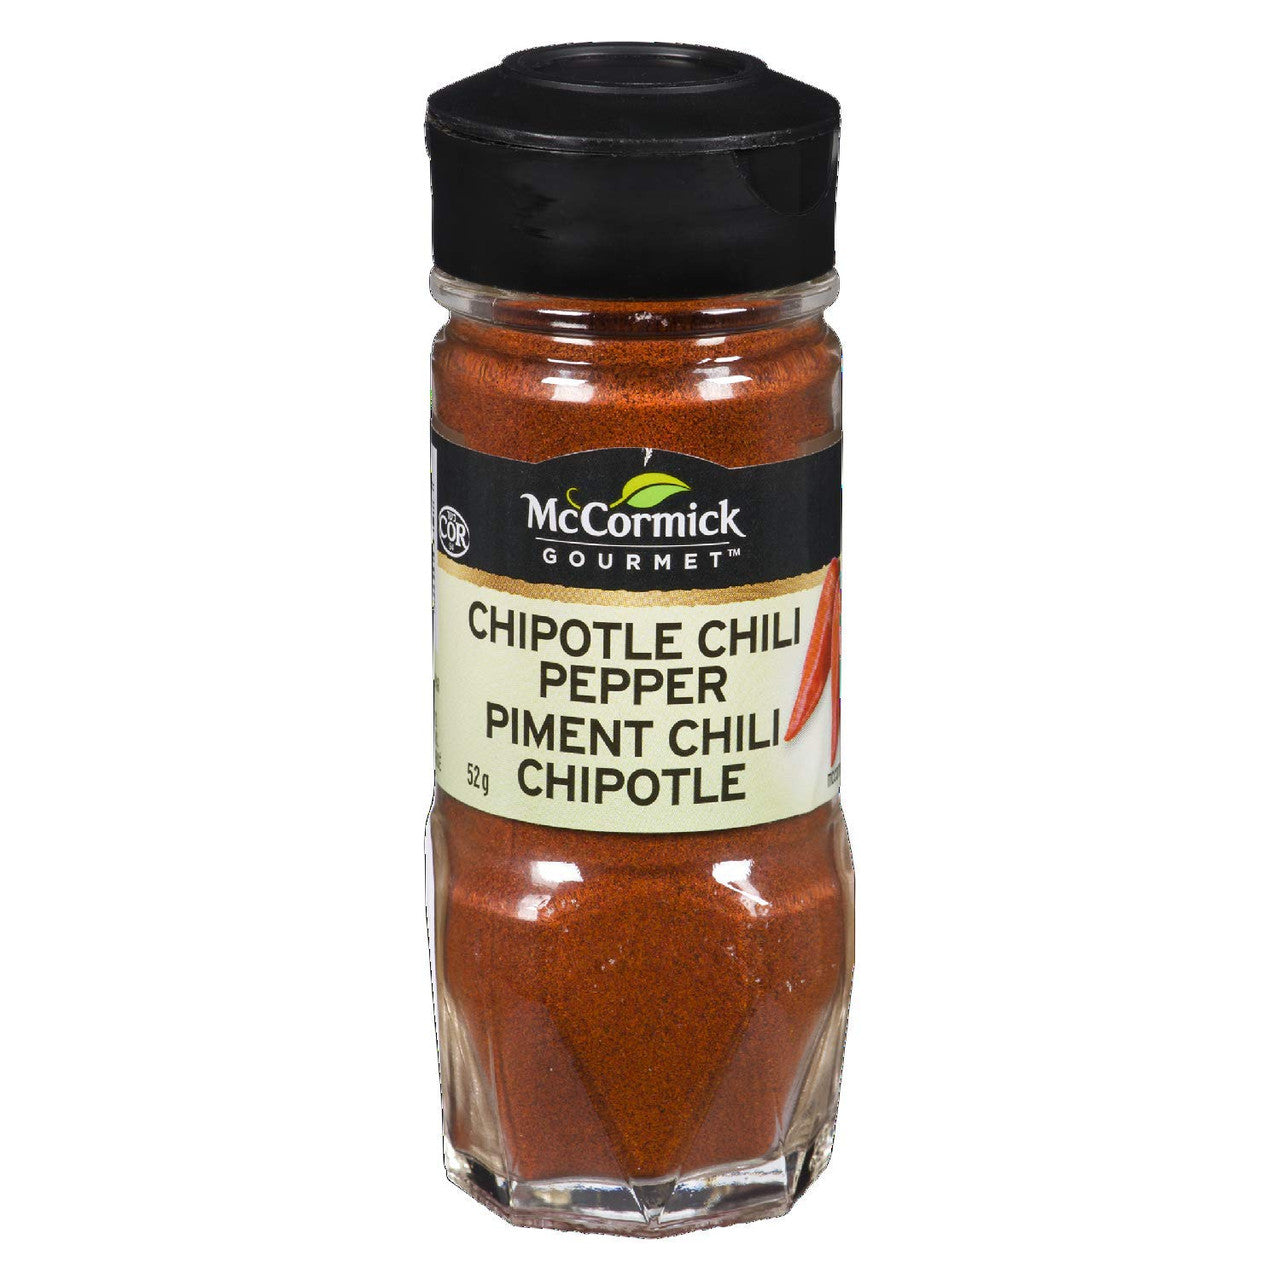 McCormick Gourmet Chipotle Chili Pepper Powder, 52g/1.8oz., {Imported from Canada}